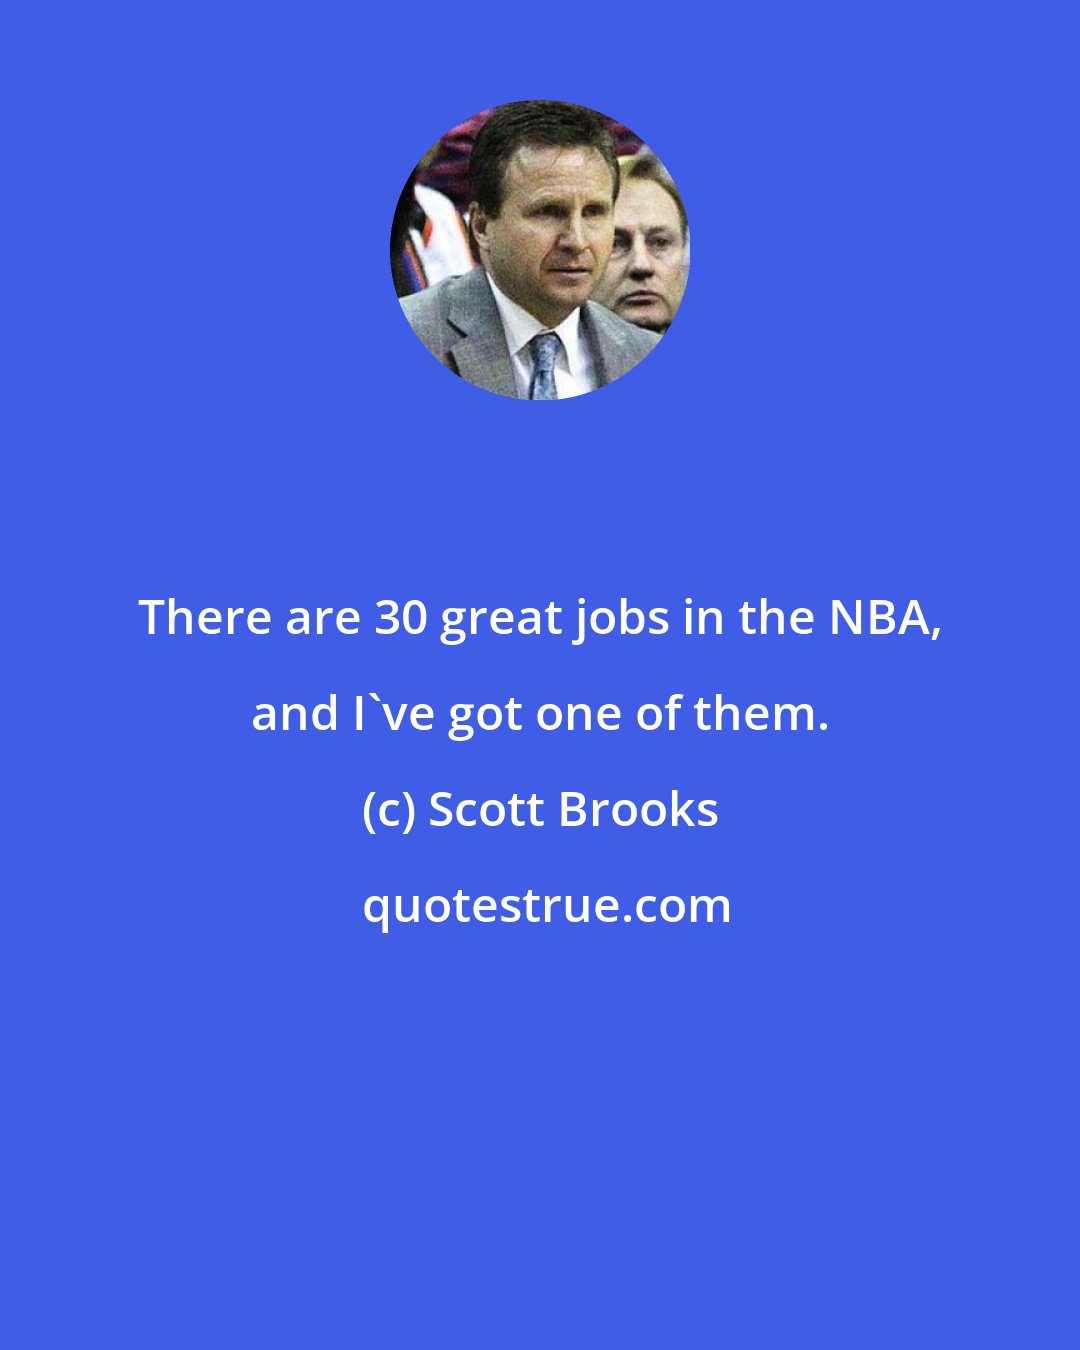 Scott Brooks: There are 30 great jobs in the NBA, and I've got one of them.